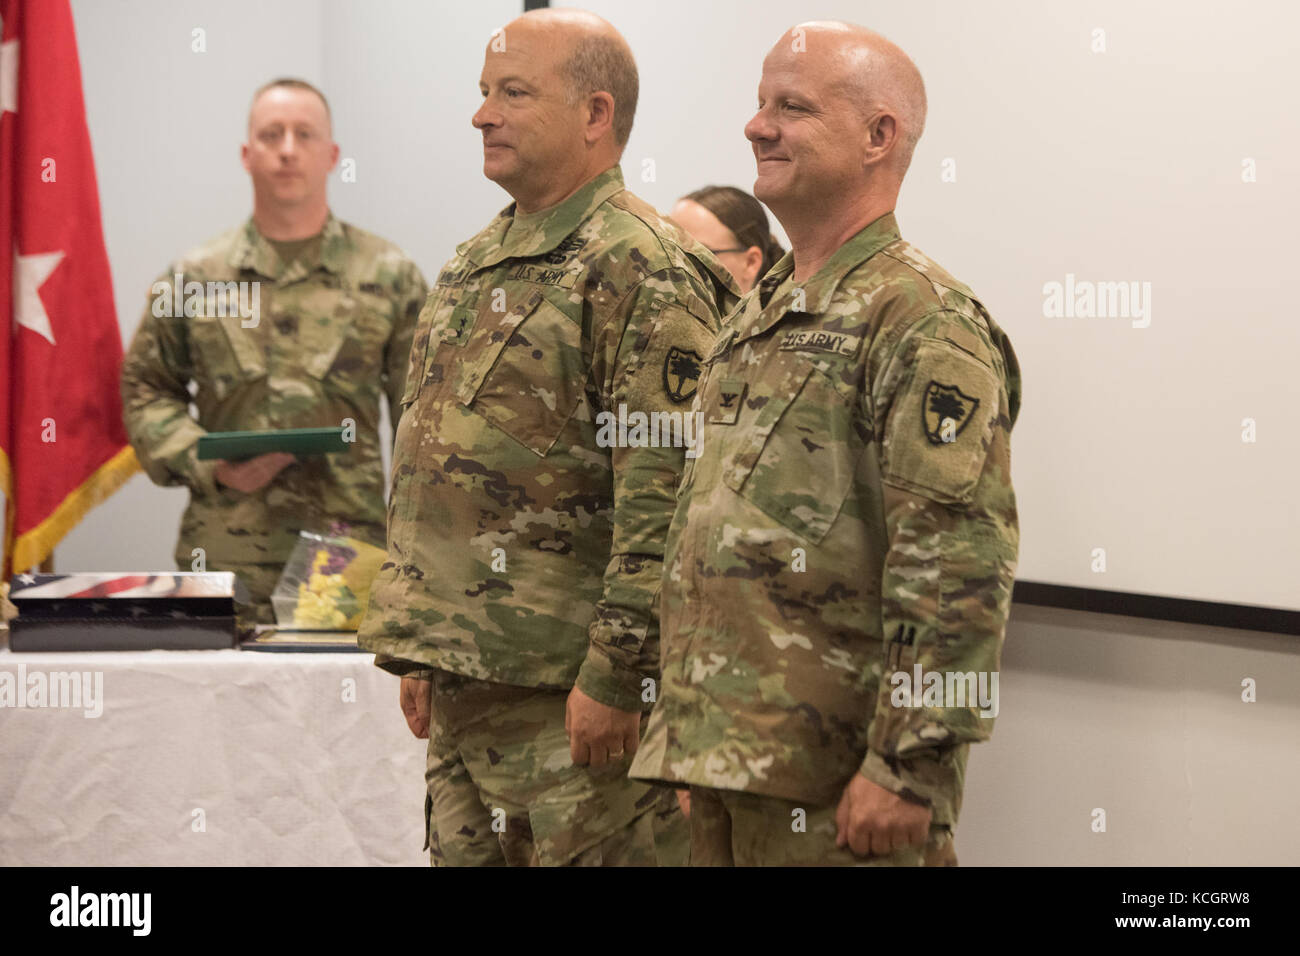 U.S. Army Col. David D. Coldren, Signal Officer and leader of the South Carolina National Guard's cyber initiatives,  retires at a ceremony held at the Joint Forces Headquarters building in Columbia, South Carolina, July 8, 2017. Coldren began his military career in 1987, serving 2 years in the Florida National Guard, 8 years in the Indiana National Guard, culminating with 18 years in the South Carolina National Guard. (U.S. Army National Guard photo by Sgt. Brian Calhoun) Stock Photo